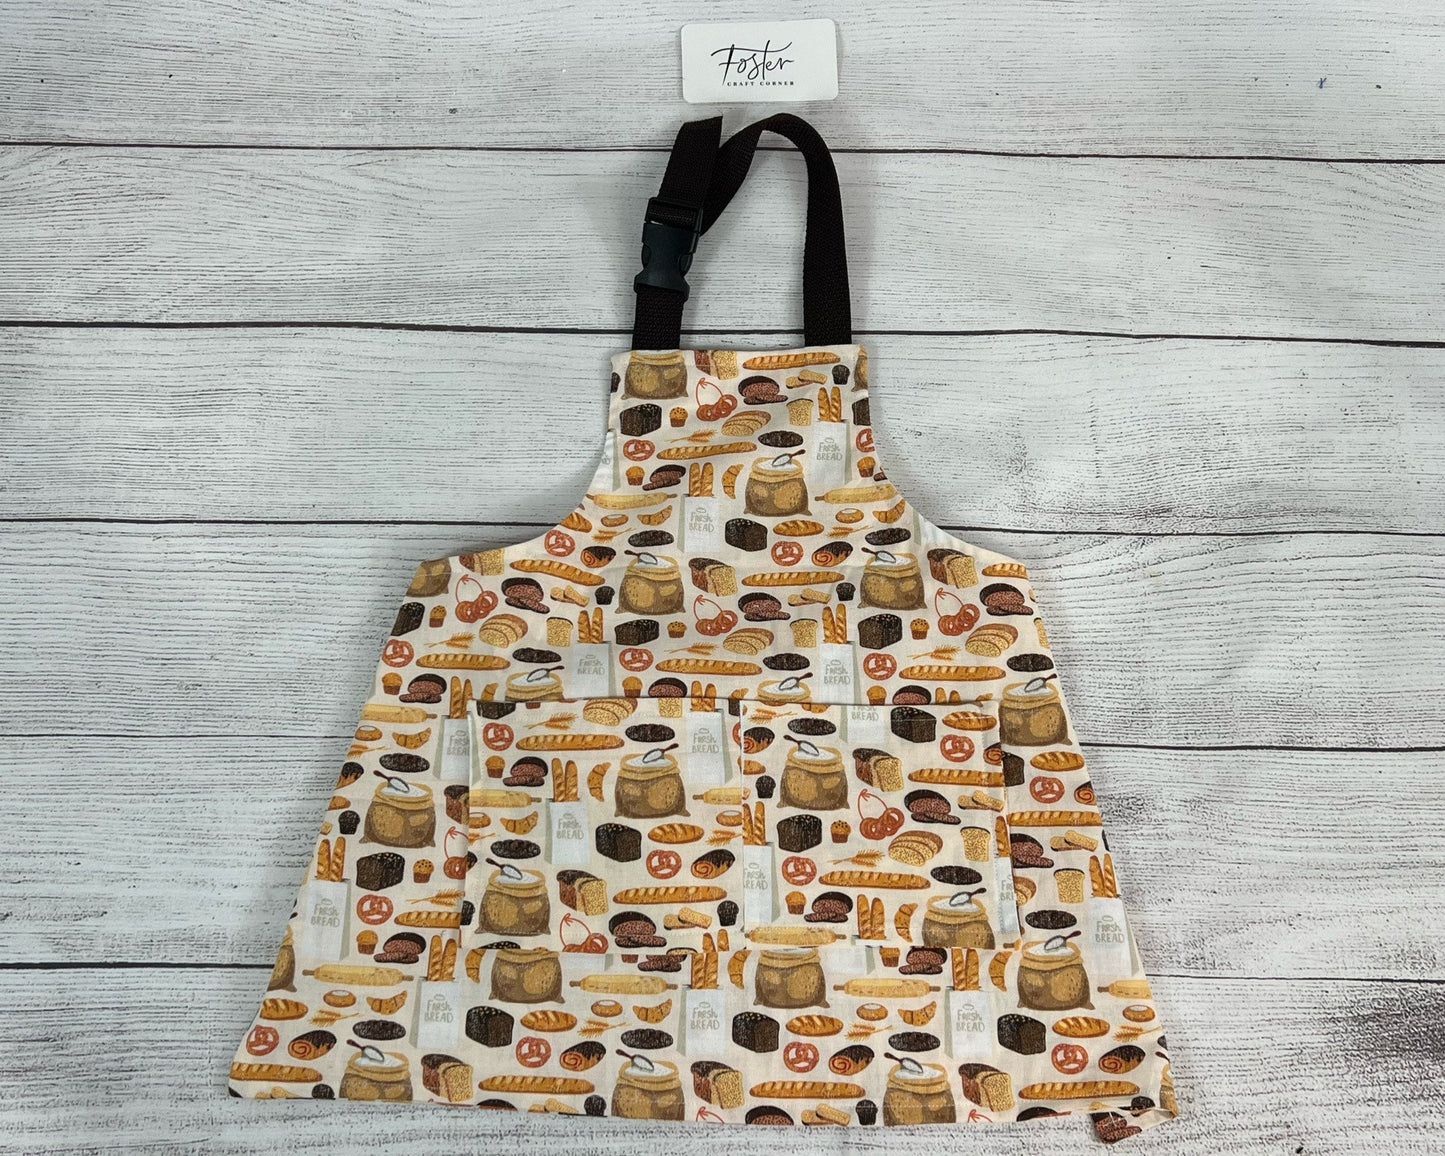 Toddler Apron - Kitchen - Cooking - Early Cooking Skills - Toddler Messes - Toddler Accessories - Bread - Baking - Loaf - Food - Small Apron